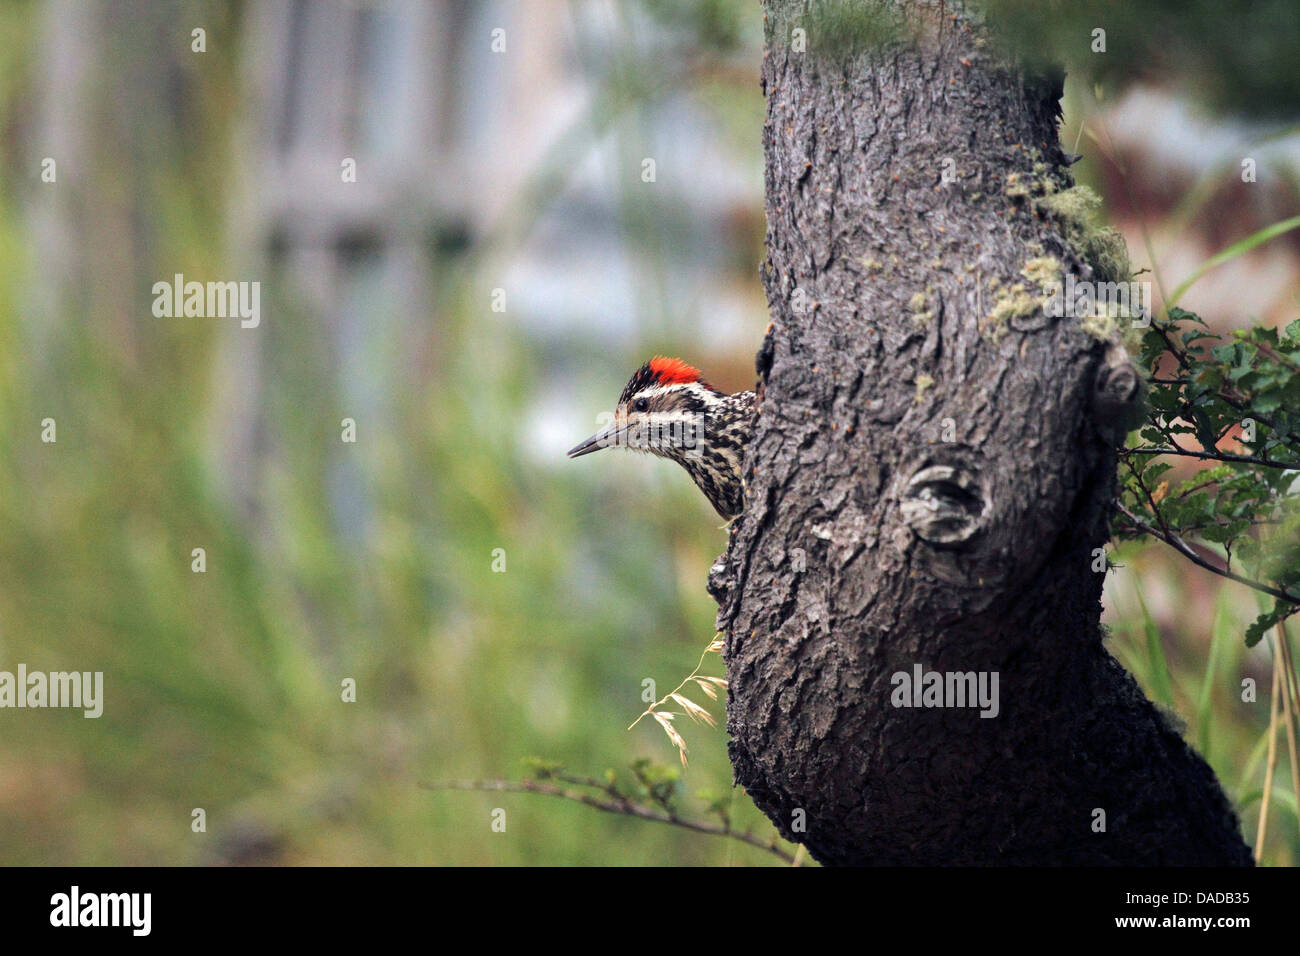 Striped woodpecker (Picoides lignarius), peering from behind a tree trunk, Chile, Ultima Esperan^za, Torres del Paine National Park Stock Photo